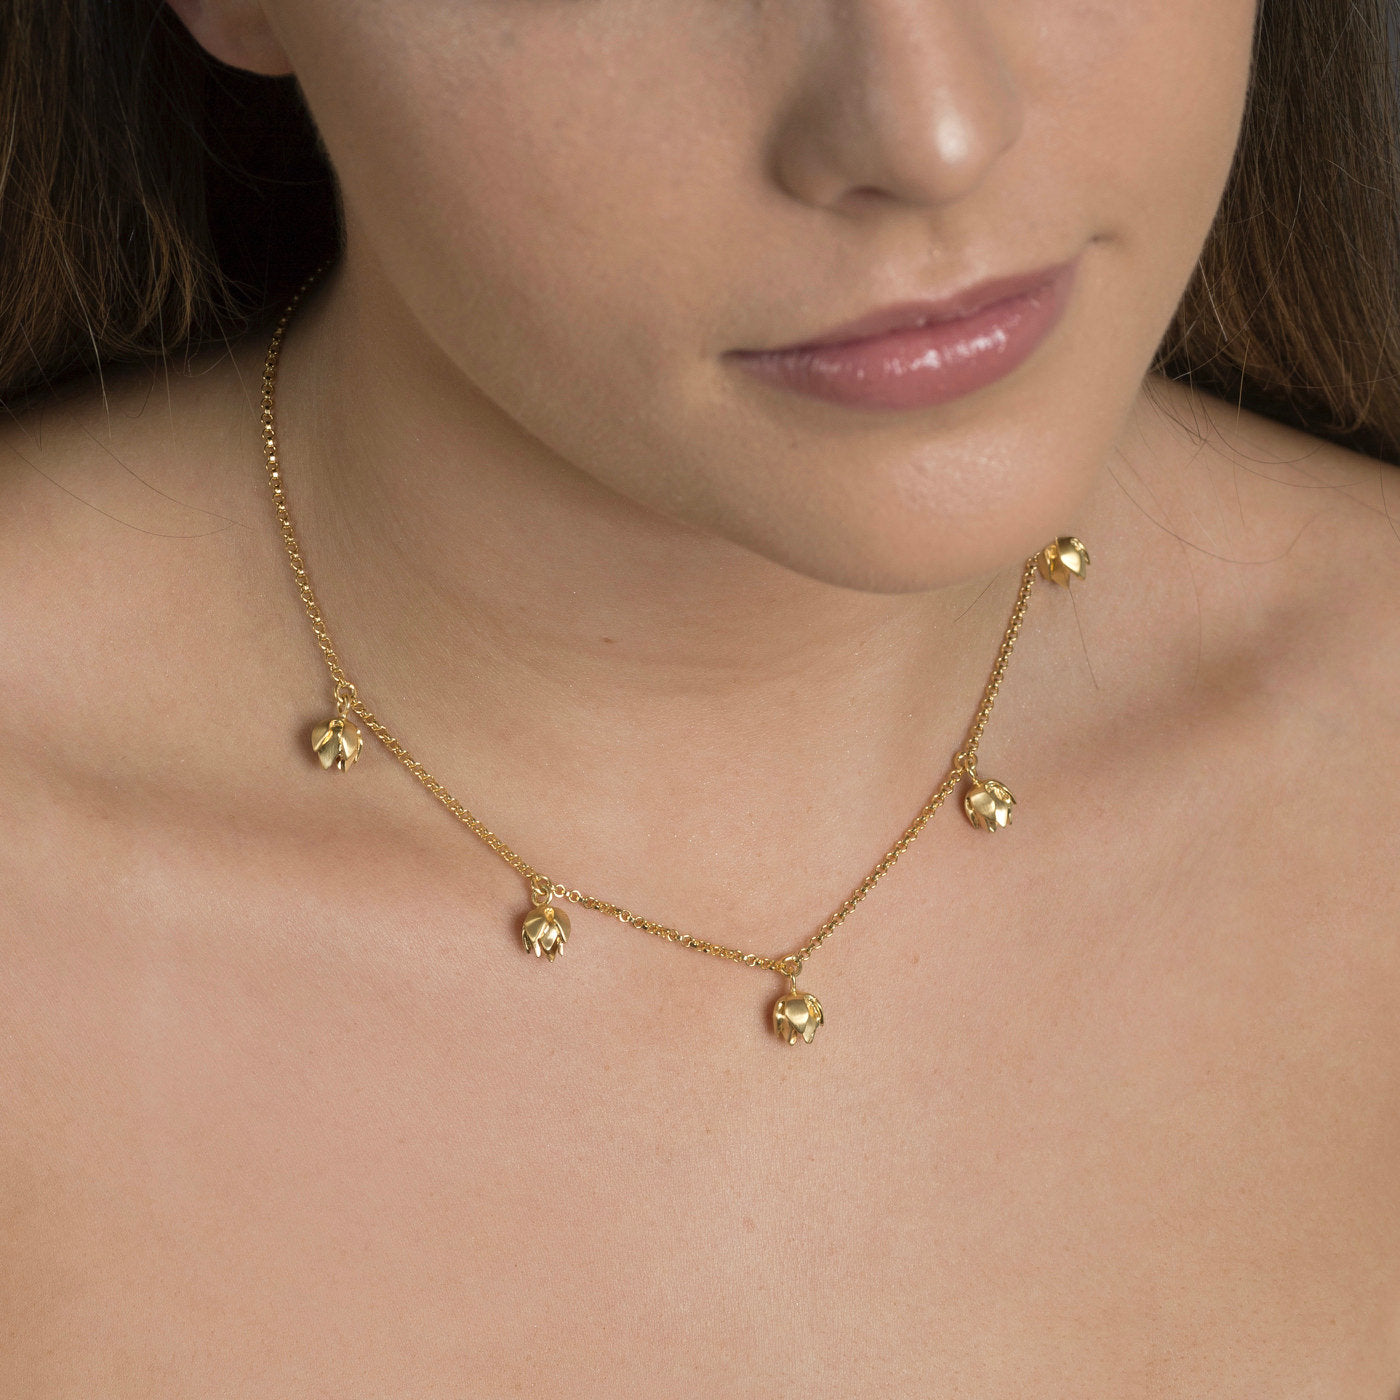 Lotus Bud Necklace - Gold